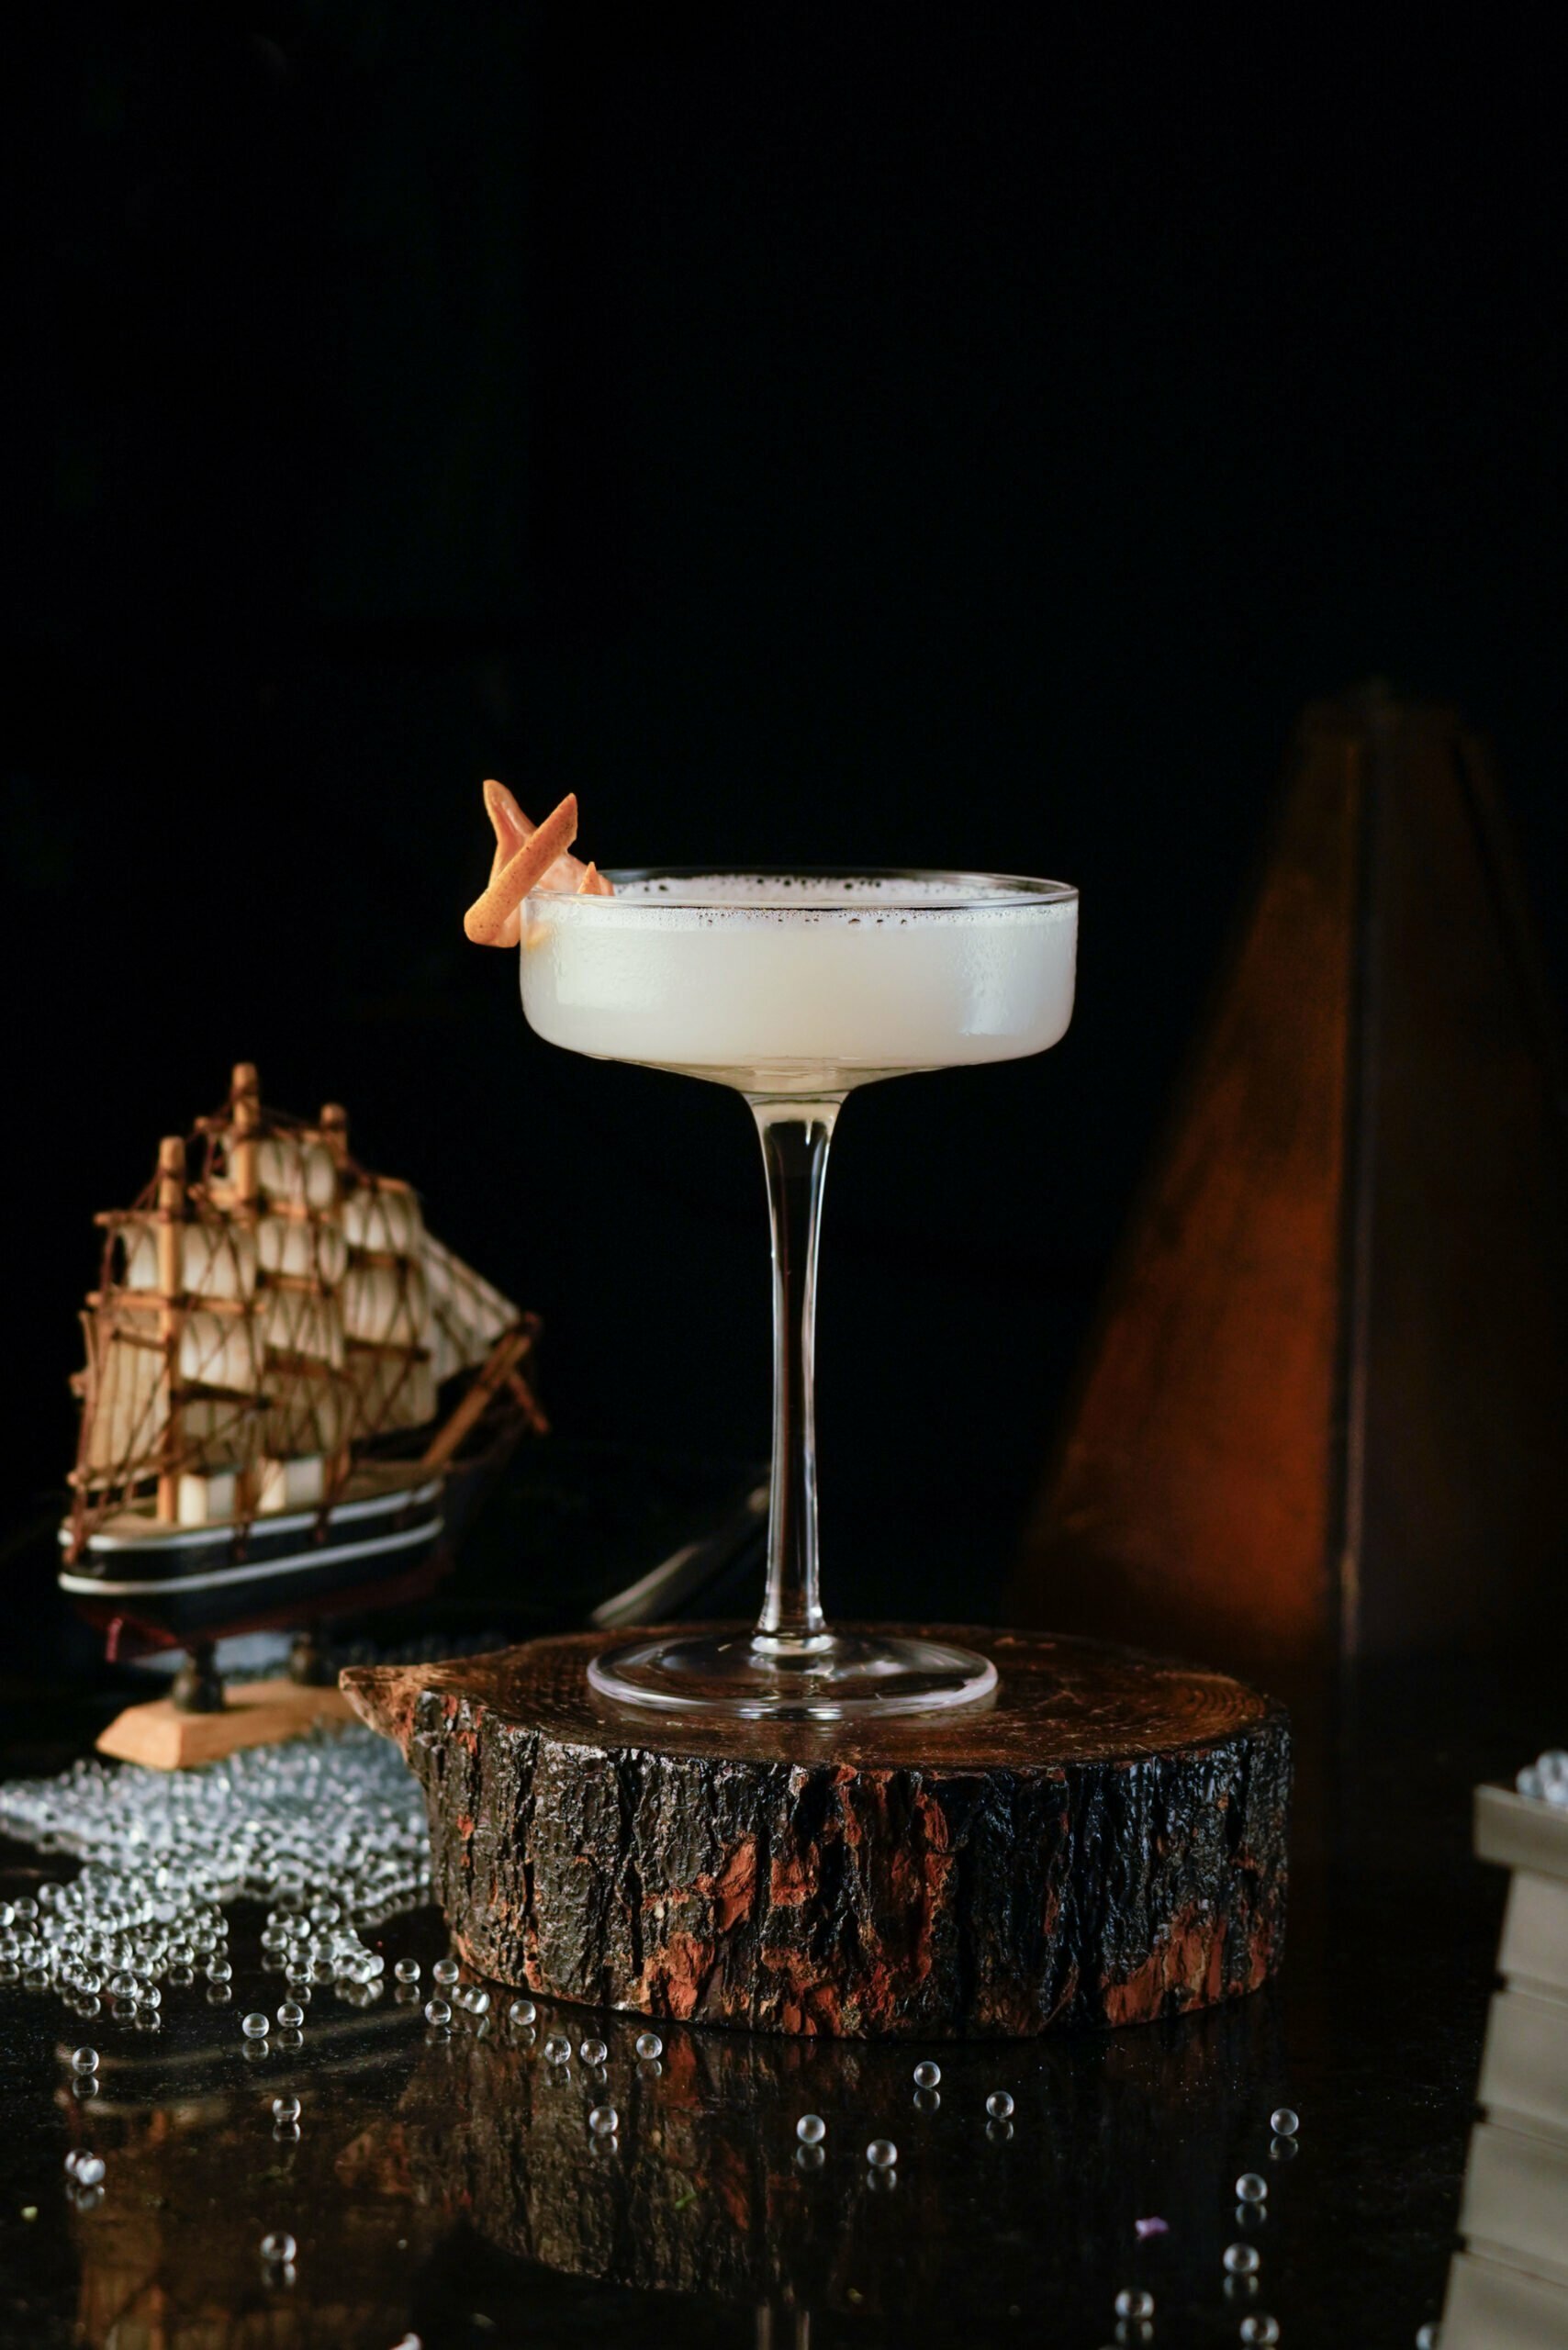 White cocktail inside a circle coupe glass garnished with an orange peel